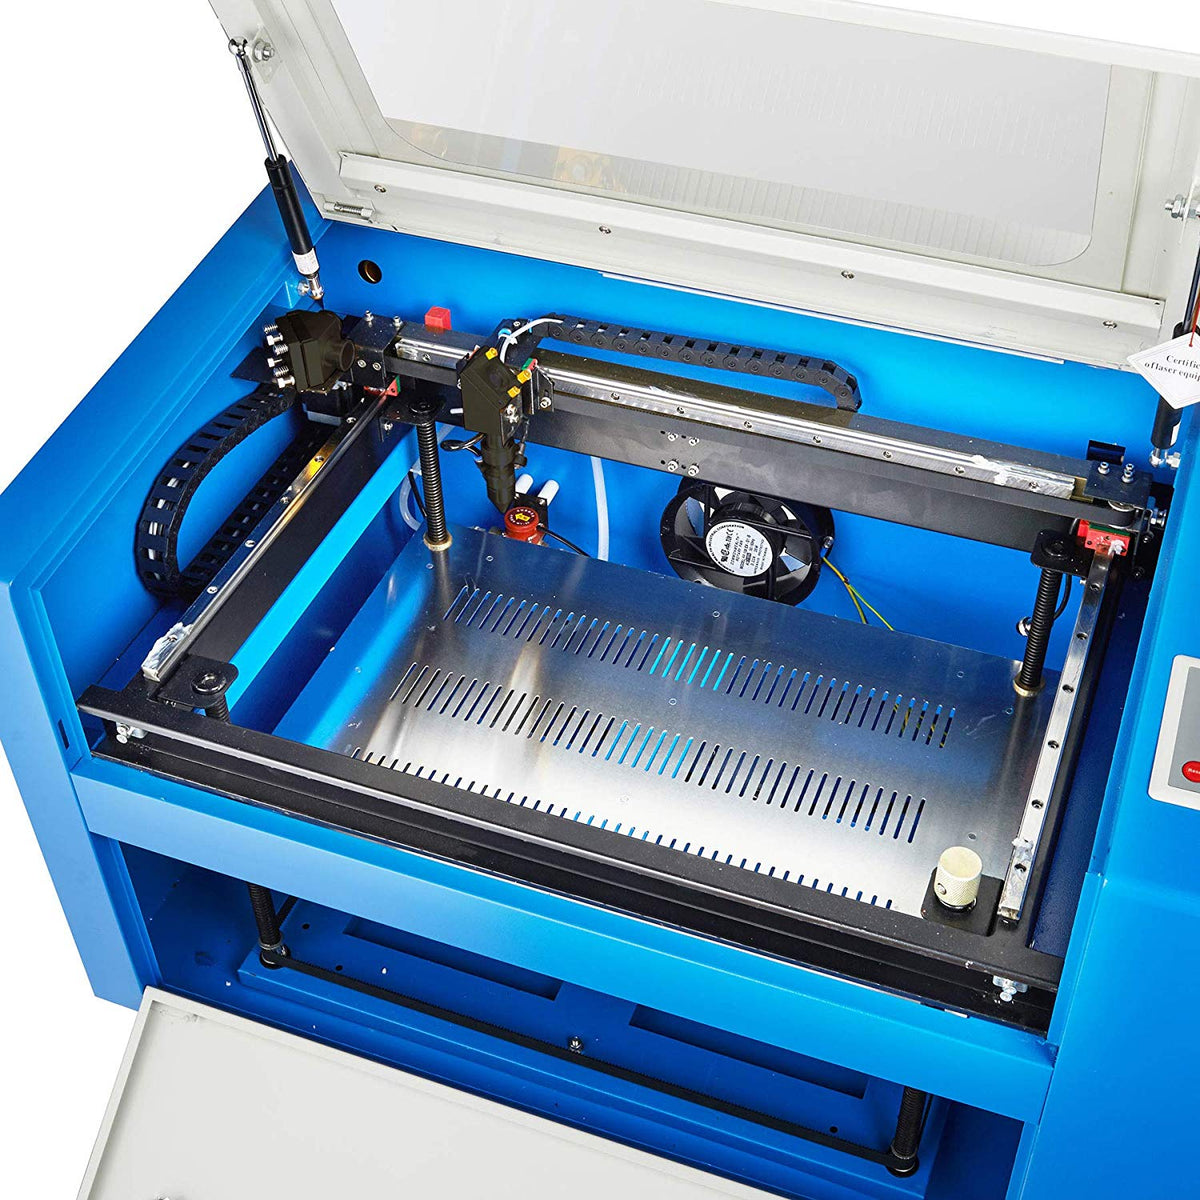 50W CO2 Laser Engraving & Cutting Machine with 12” x 20” Working Area